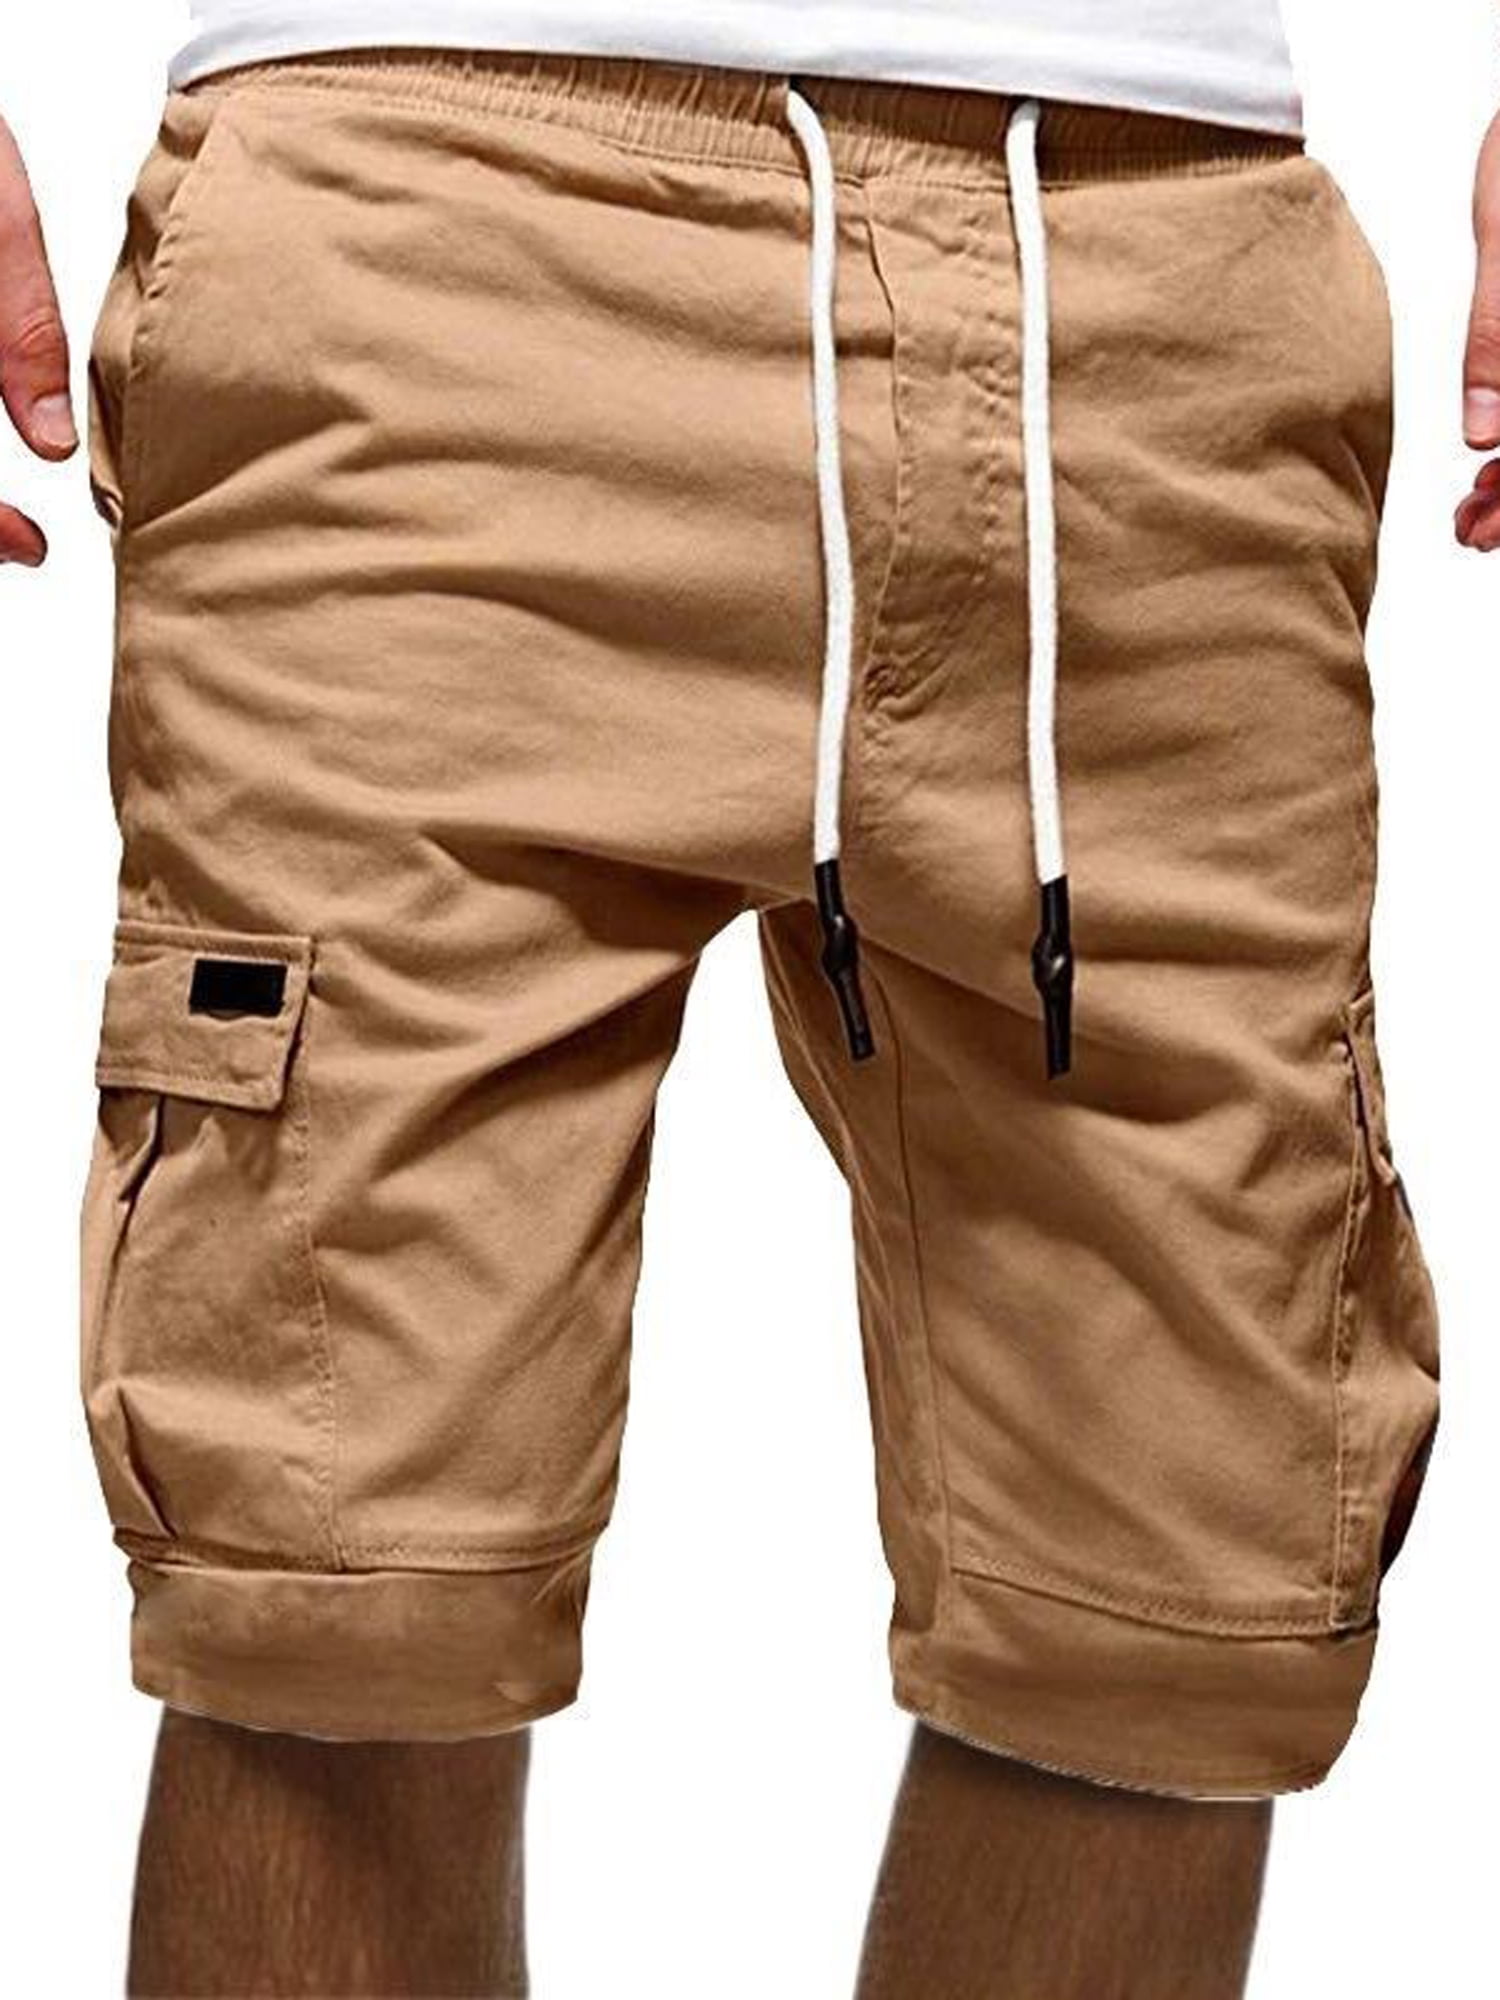 Mens Casual Cotton Hiking Army Combat Pants Camo Work Cargo Shorts 3/4 Trousers 